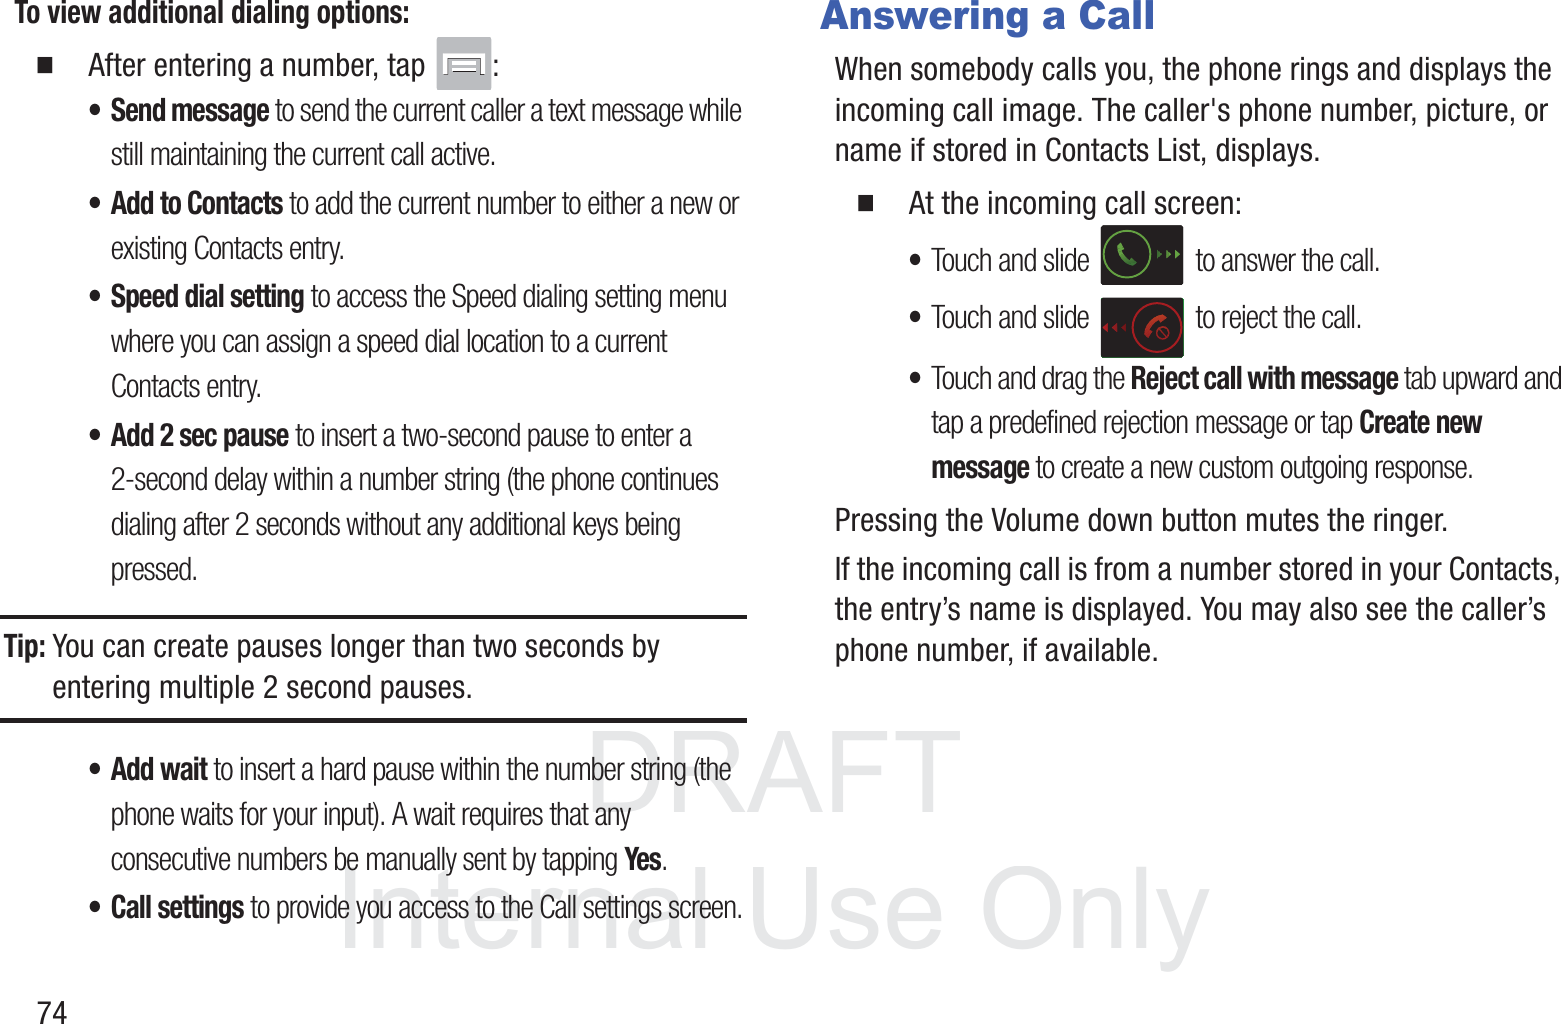 DRAFT InternalUse Only74To view additional dialing options:䡲  After entering a number, tap  :•Send message to send the current caller a text message while still maintaining the current call active.• Add to Contacts to add the current number to either a new or existing Contacts entry. • Speed dial setting to access the Speed dialing setting menu where you can assign a speed dial location to a current Contacts entry. • Add 2 sec pause to insert a two-second pause to enter a 2-second delay within a number string (the phone continues dialing after 2 seconds without any additional keys being pressed.Tip: You can create pauses longer than two seconds by entering multiple 2 second pauses.• Add wait to insert a hard pause within the number string (the phone waits for your input). A wait requires that any consecutive numbers be manually sent by tapping Yes.• Call settings to provide you access to the Call settings screen.Answering a CallWhen somebody calls you, the phone rings and displays the incoming call image. The caller&apos;s phone number, picture, or name if stored in Contacts List, displays.䡲  At the incoming call screen:•Touch and slide   to answer the call.•Touch and slide   to reject the call.•Touch and drag the Reject call with message tab upward and tap a predefined rejection message or tap Create new message to create a new custom outgoing response.Pressing the Volume down button mutes the ringer.If the incoming call is from a number stored in your Contacts, the entry’s name is displayed. You may also see the caller’s phone number, if available.